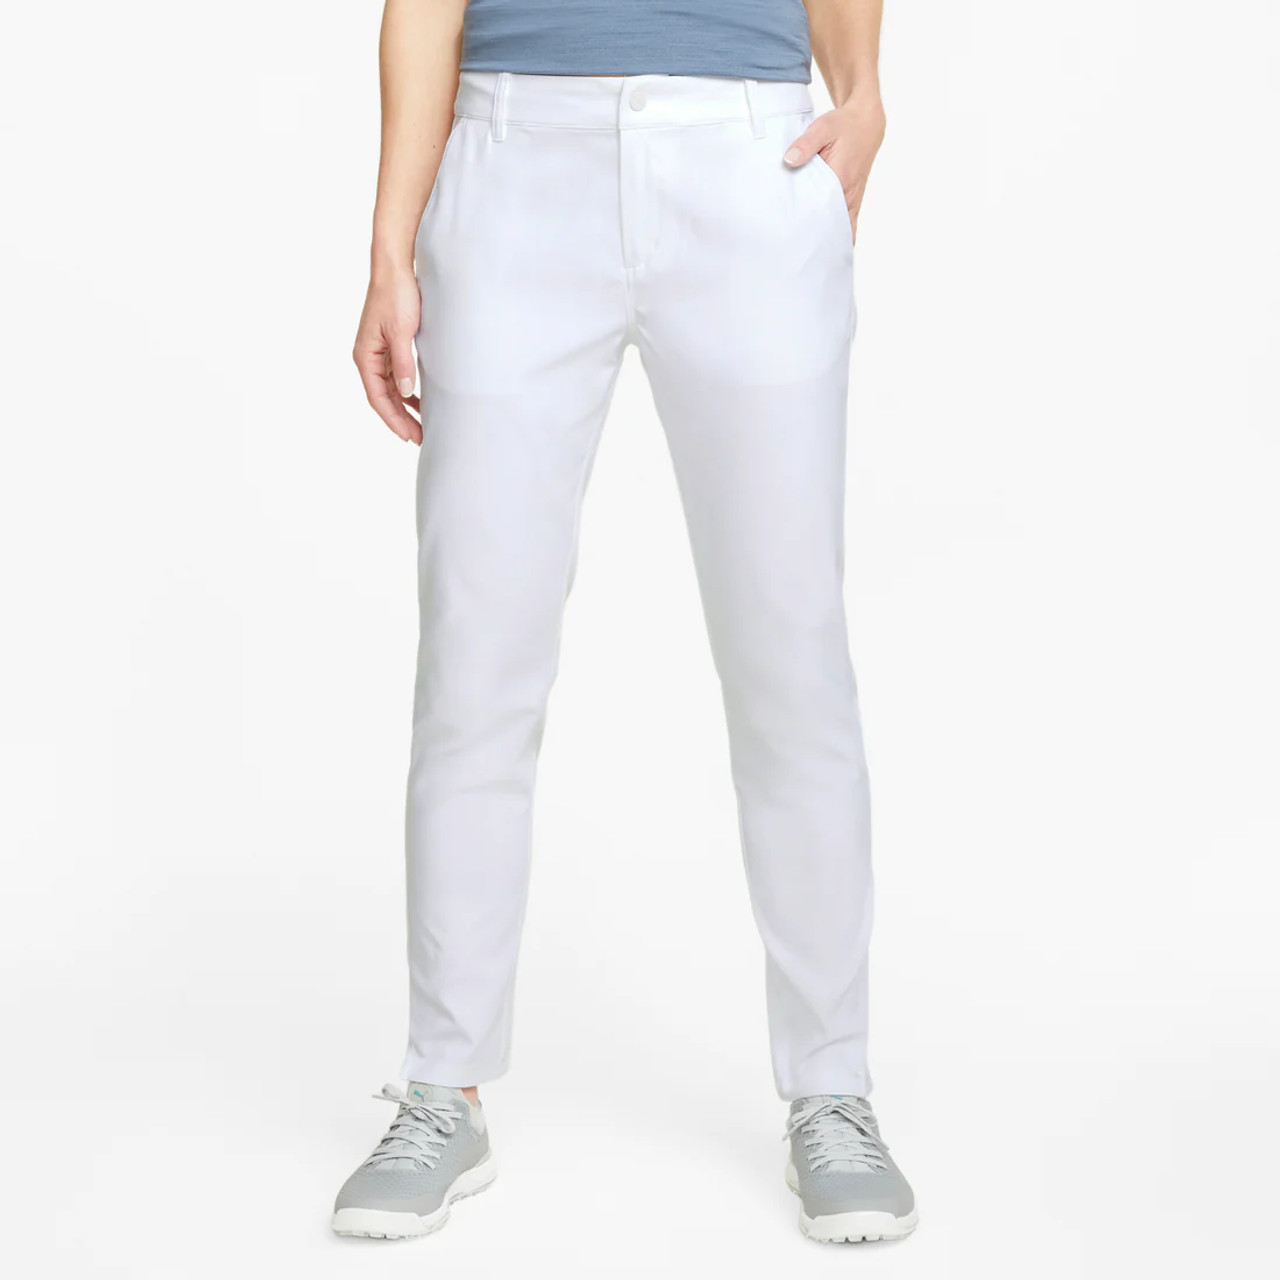 Puma Women's Boardwalk Golf Pants - Bright White - Fore Ladies - Golf  Dresses and Clothes, Tennis Skirts and Outfits, and Fashionable Activewear